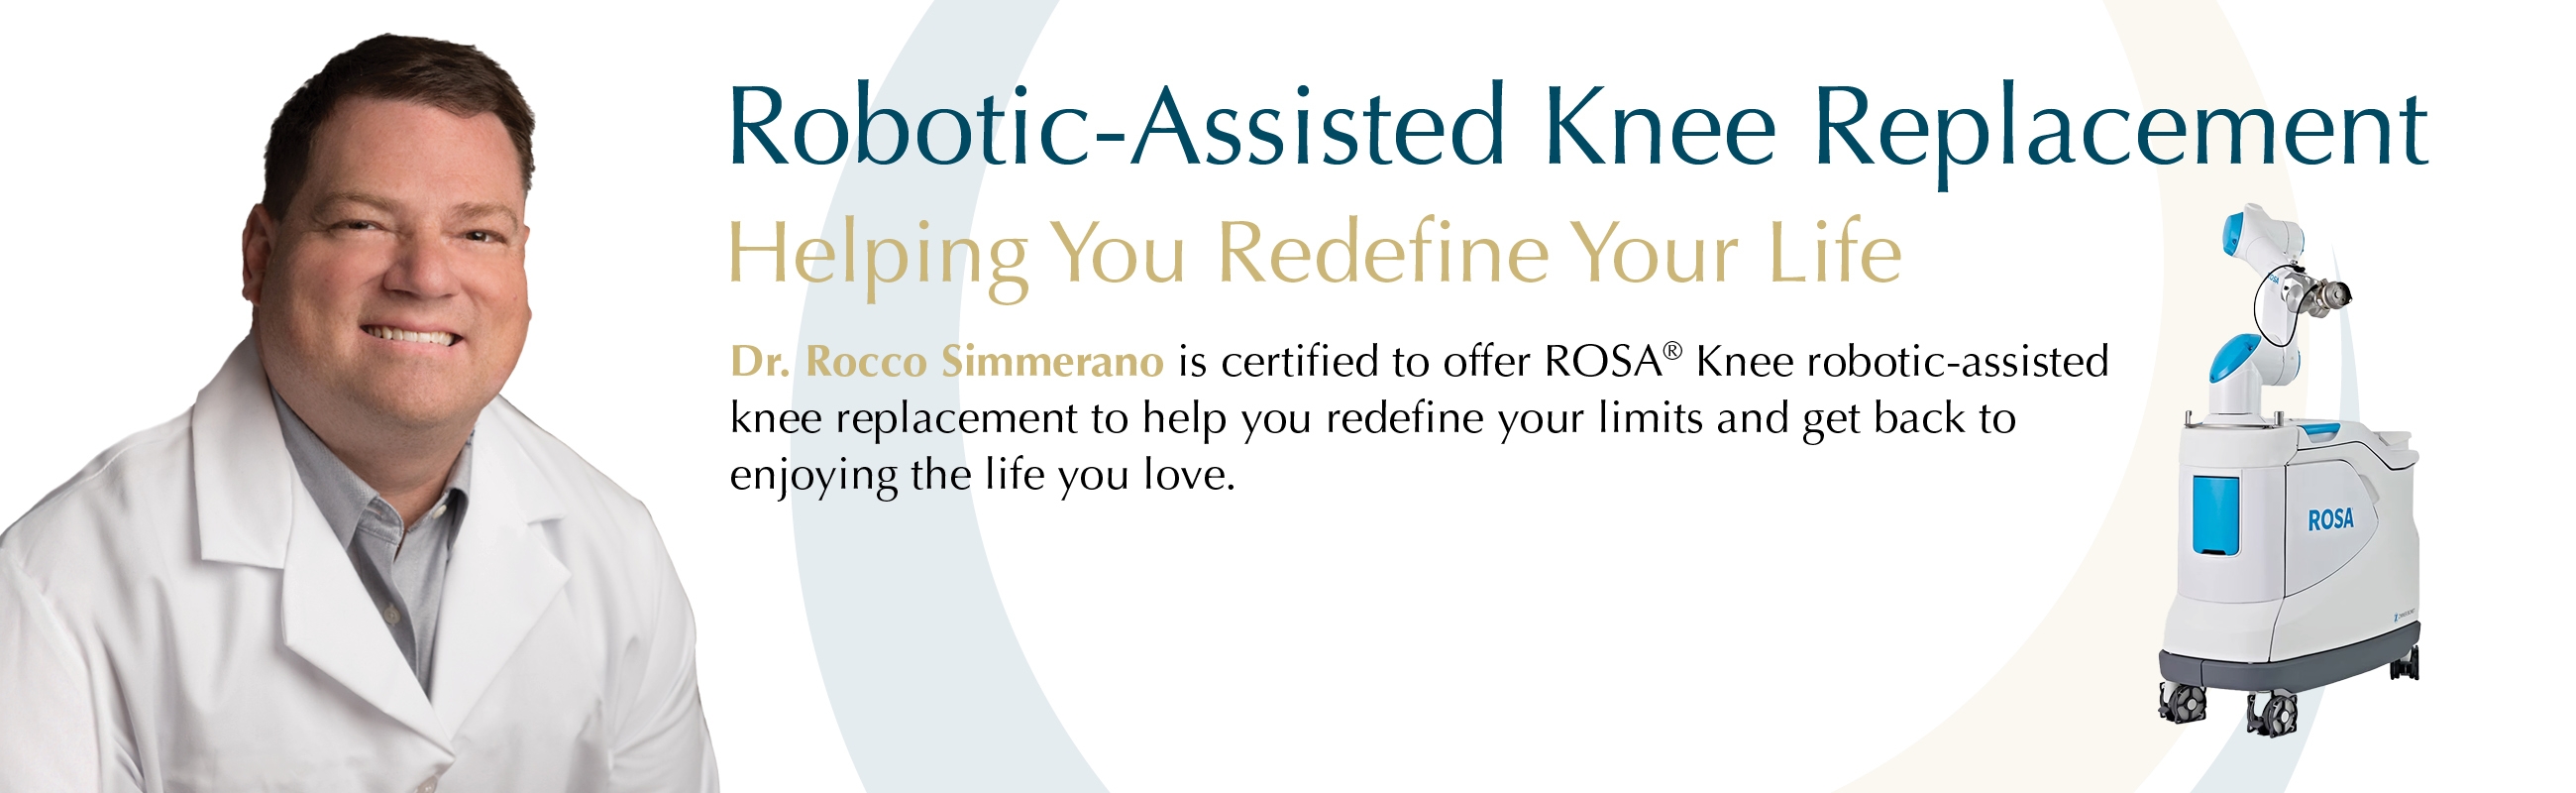 Robotic-Assisted Knee Replacement by Dr. Rocco Simmerano